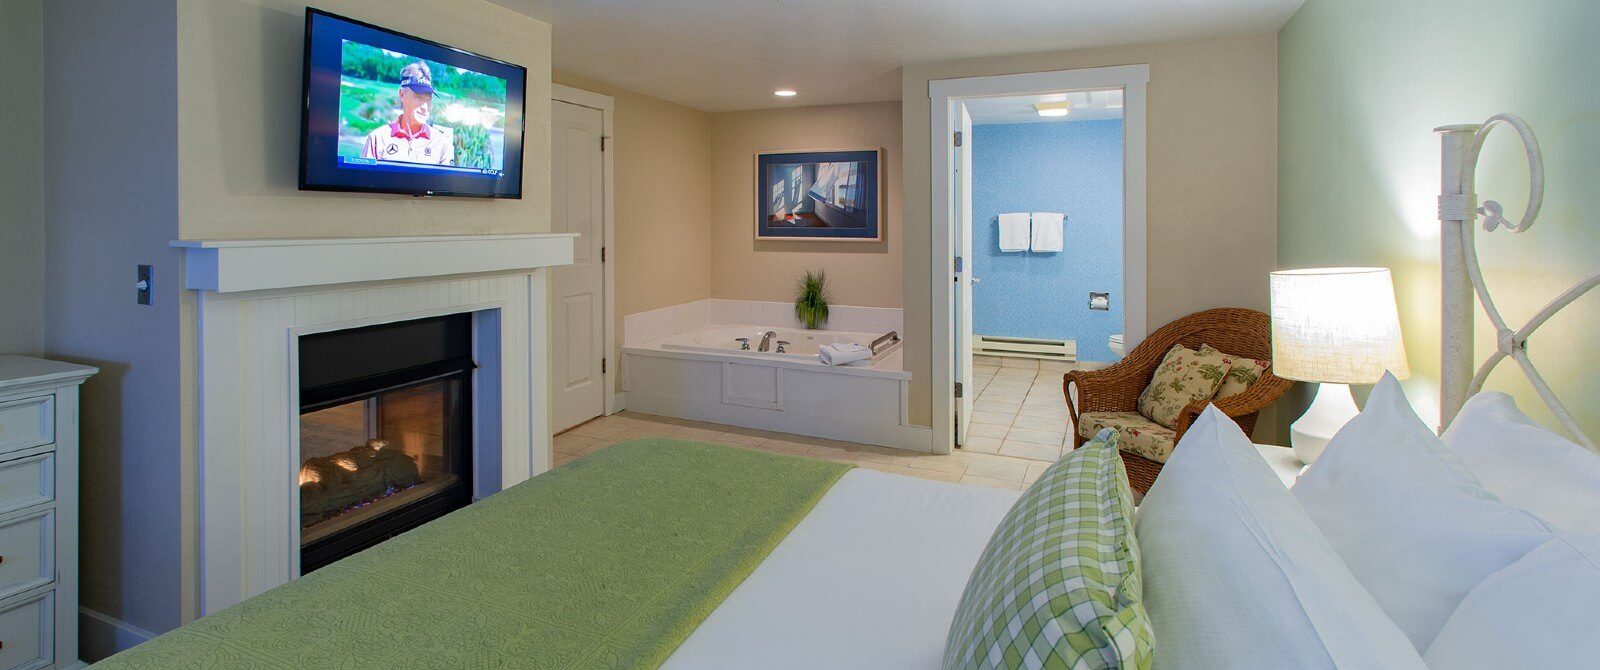 Spacious bedroom with king bed, TV above gas fireplace and corner jacuzzi tub